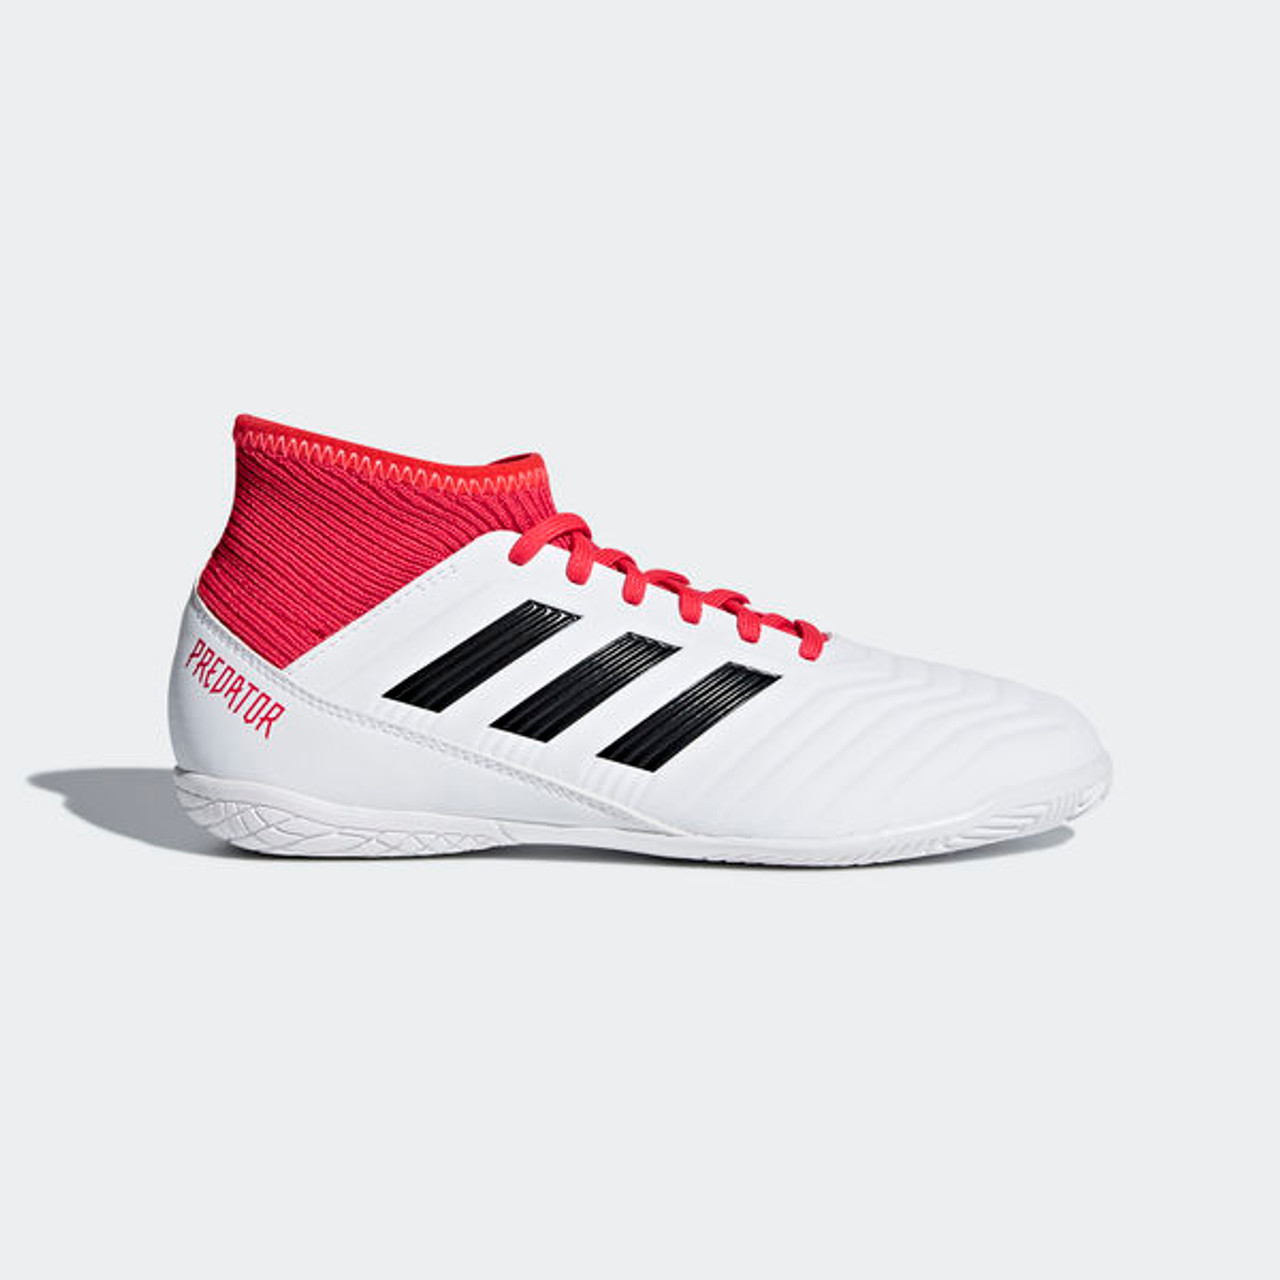 ADIDAS JR PREDATOR TANGO 18.3 Indoor Shoes White/real coral - Soccer Plus